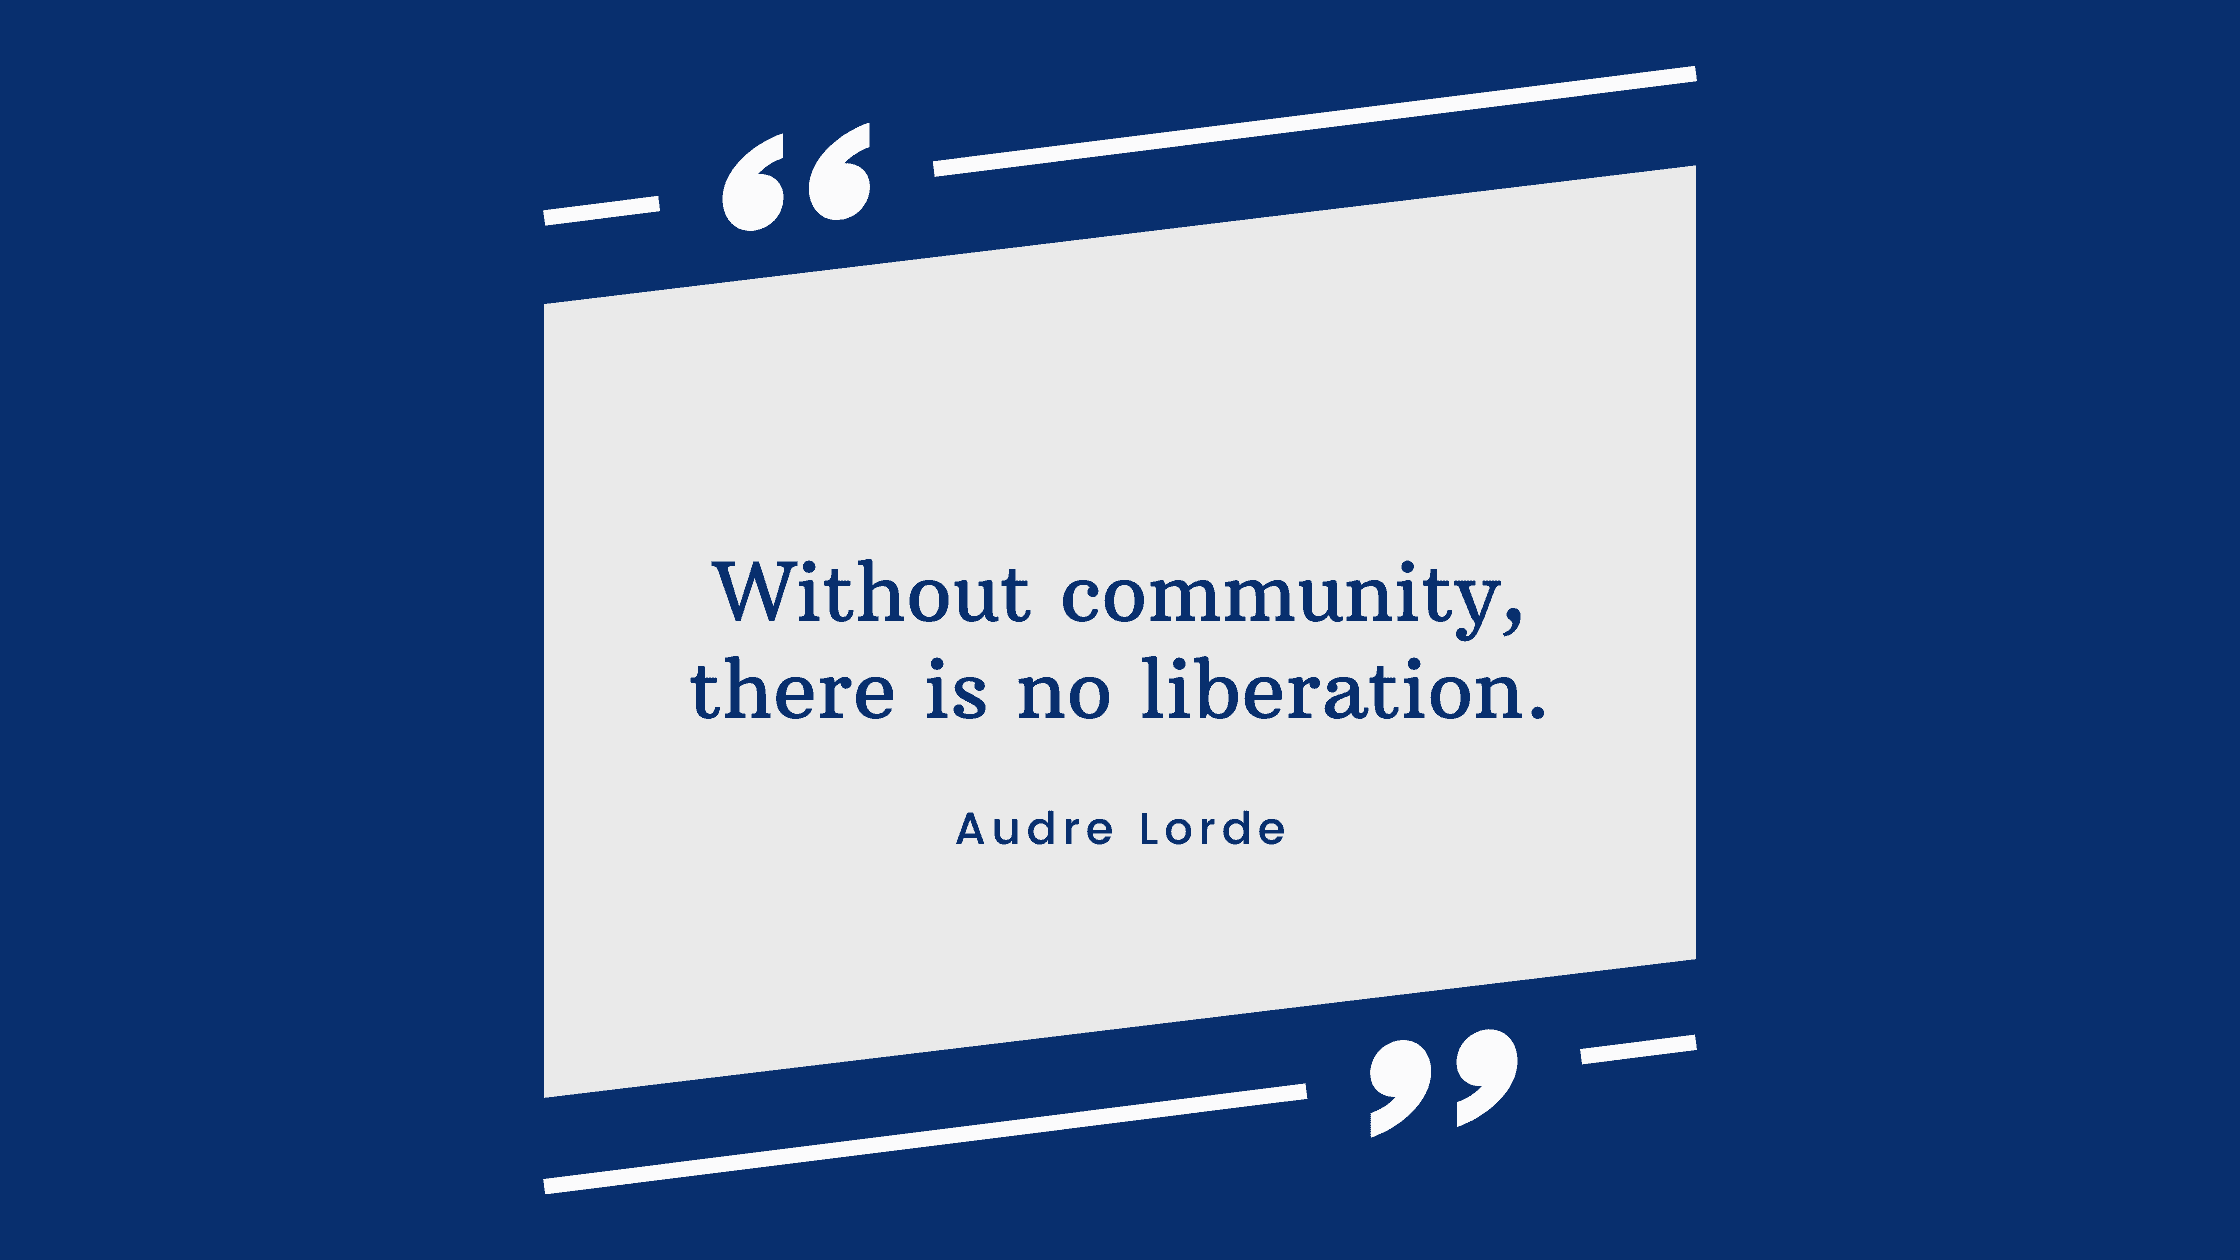 Blue text outlined with white quotation marks reads: Without community, there is no liberation. Audre Lorde's name appears below.